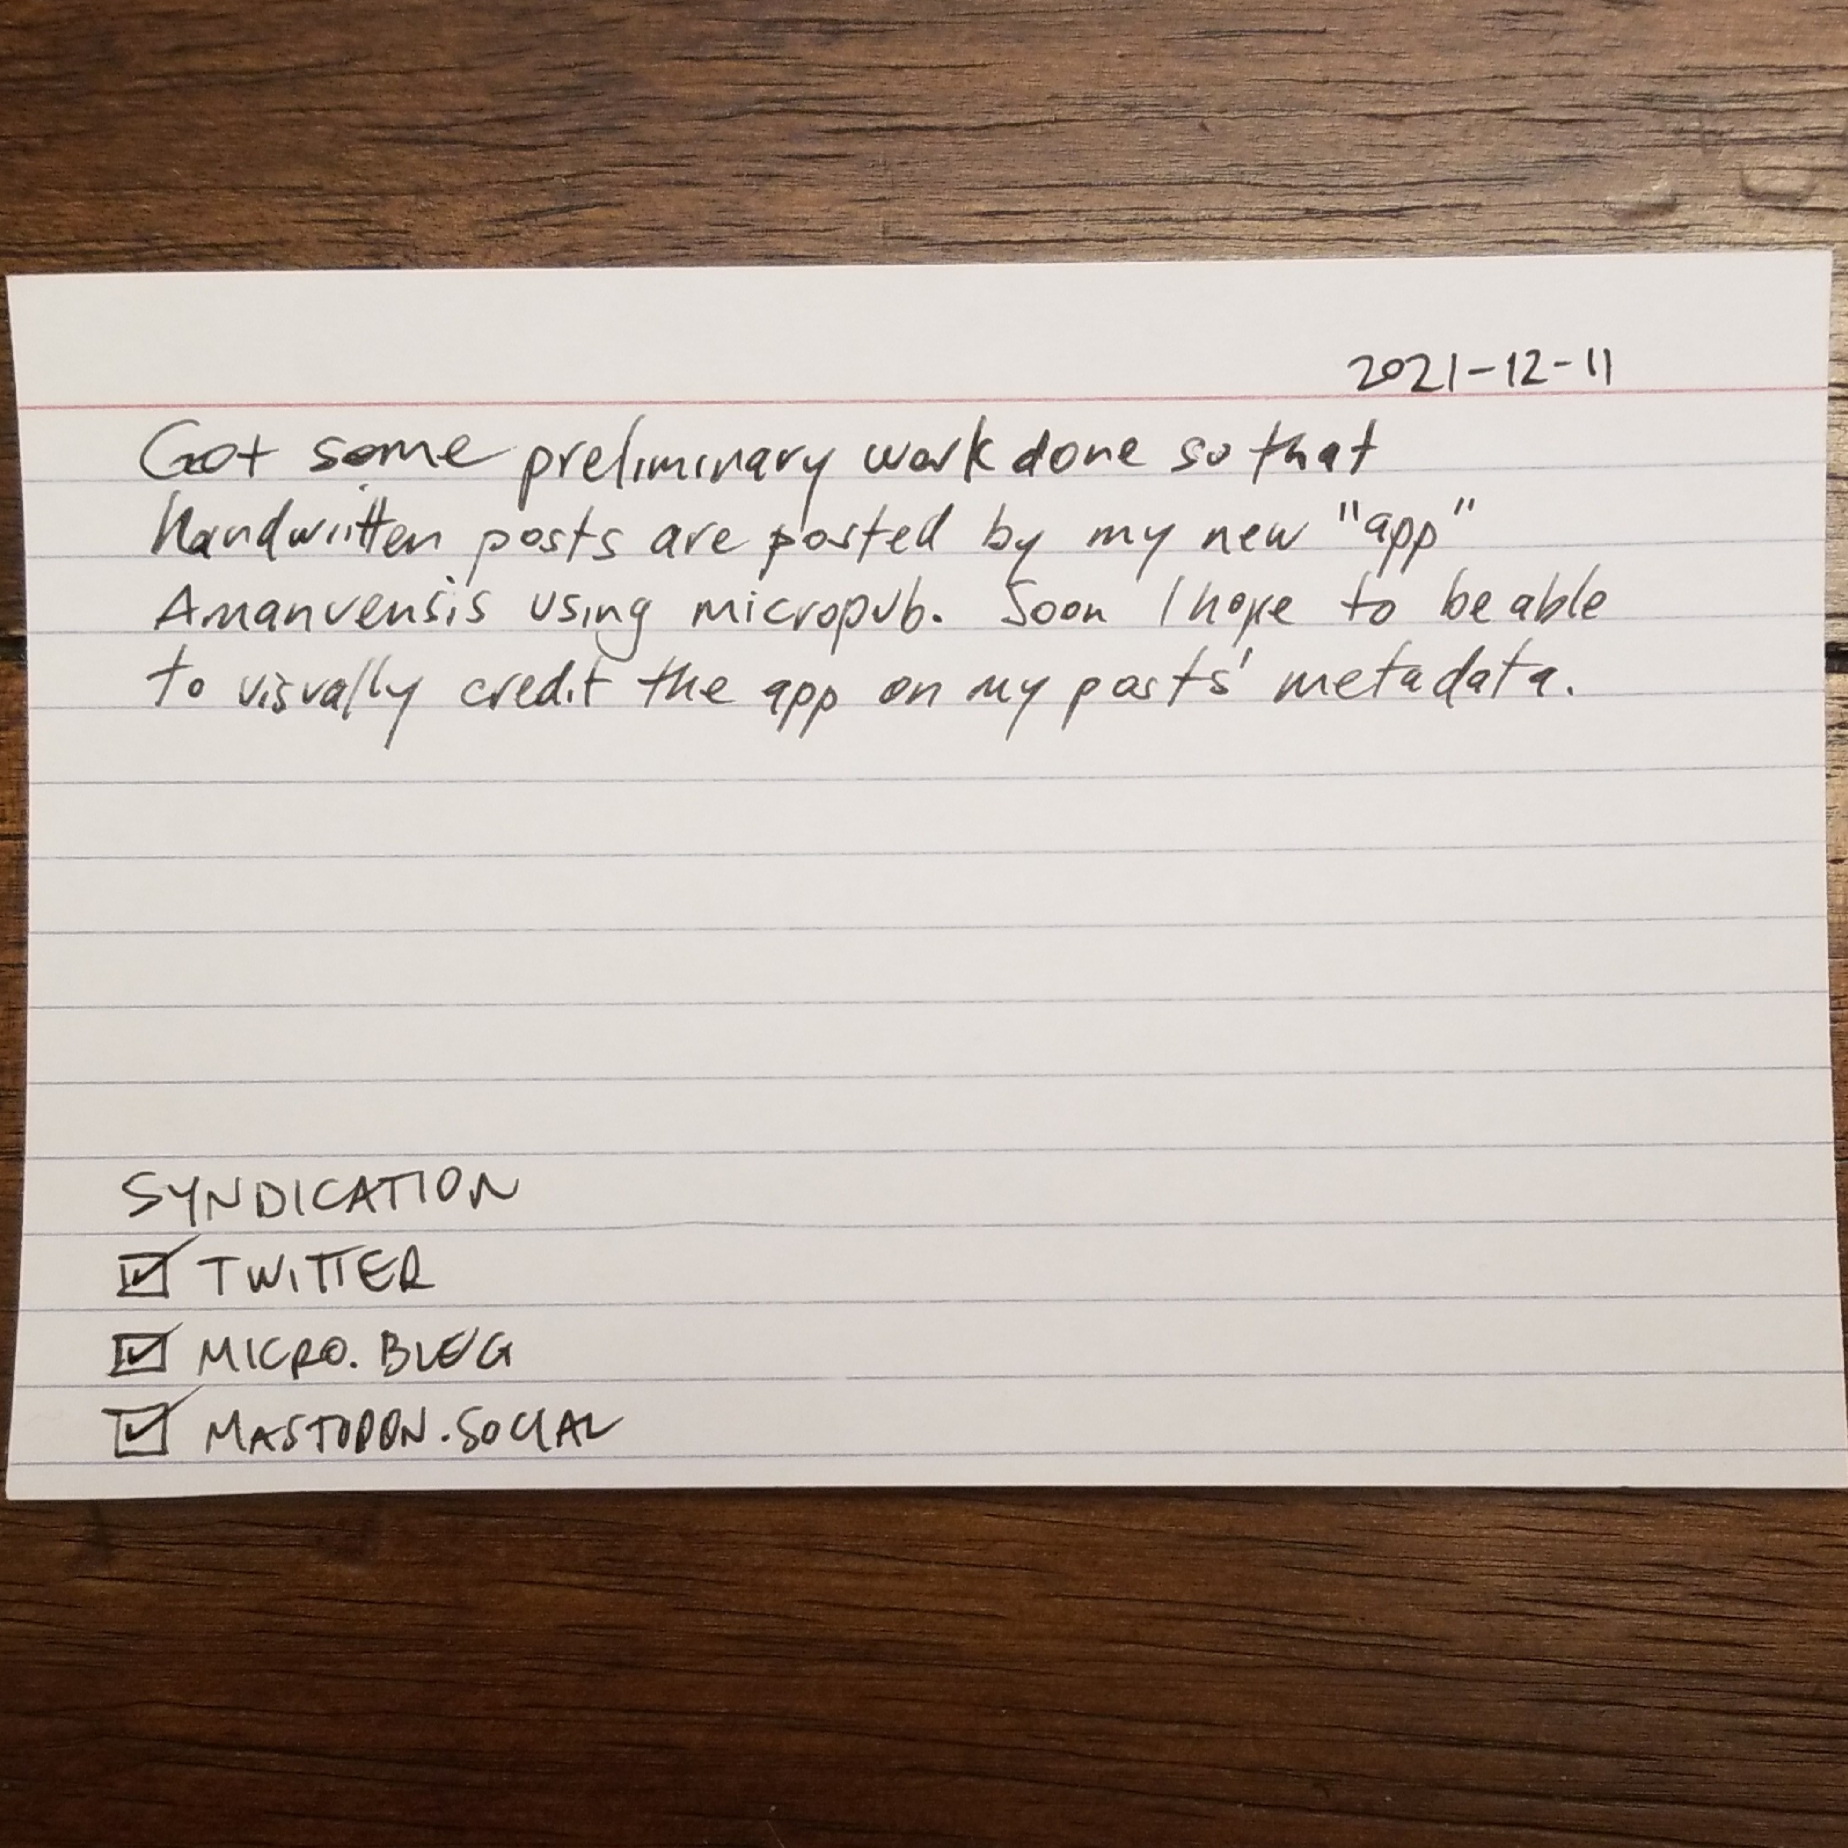 Index card with the handwritten content of the post in it.